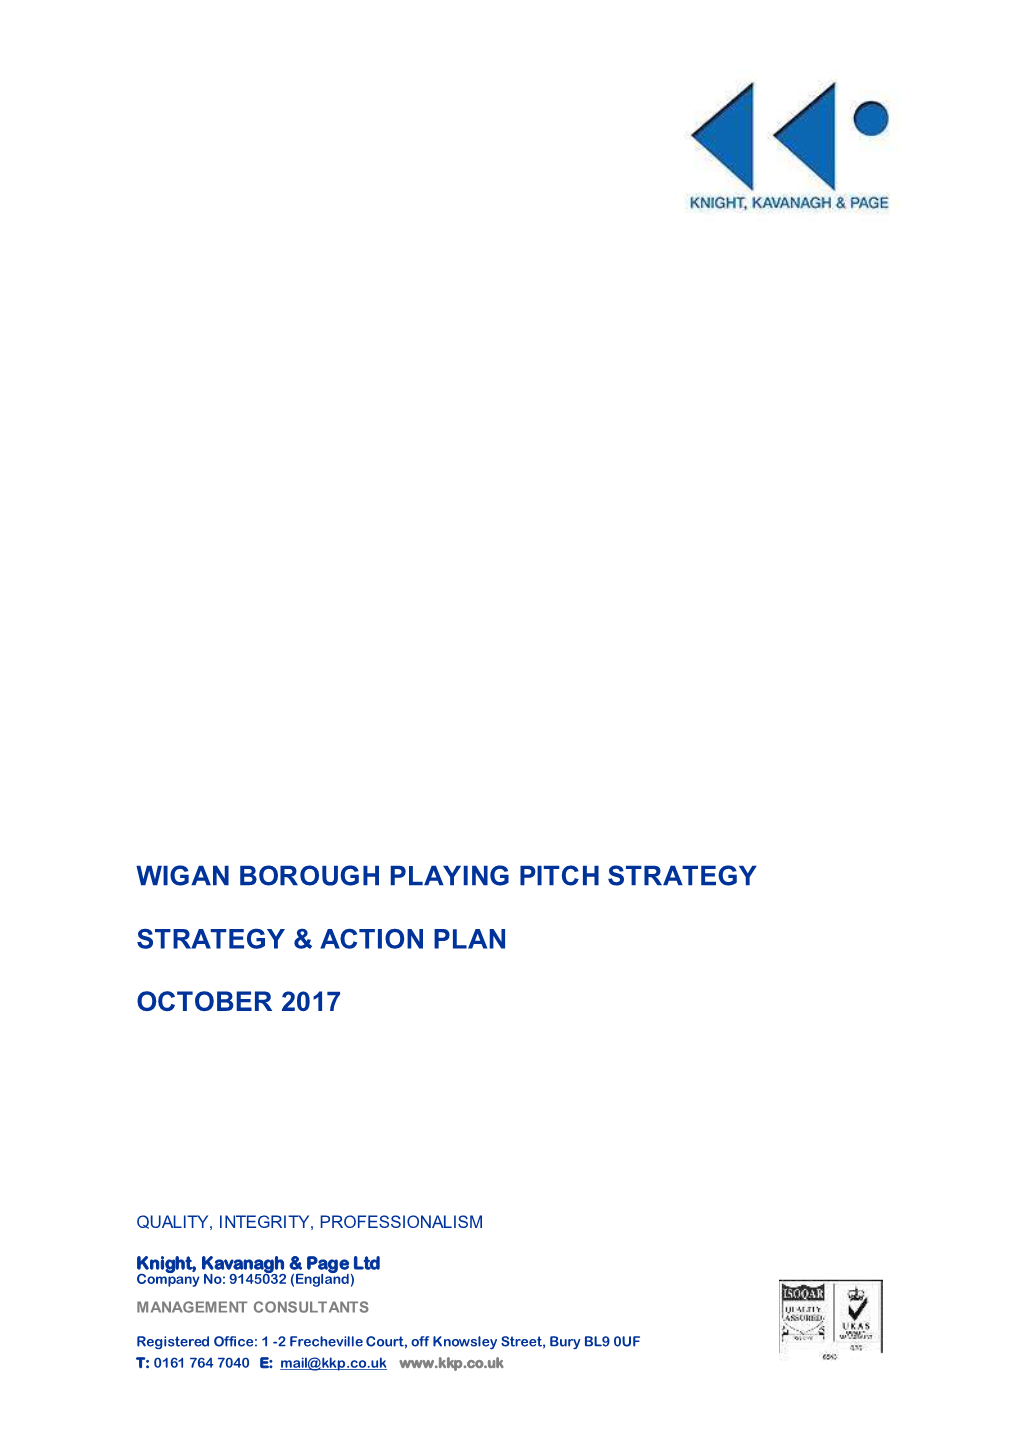 Strategy and Action Plan Recommends a Number of Priority Projects for Wigan Borough Which Should Be Implemented Over the Next Ten Years